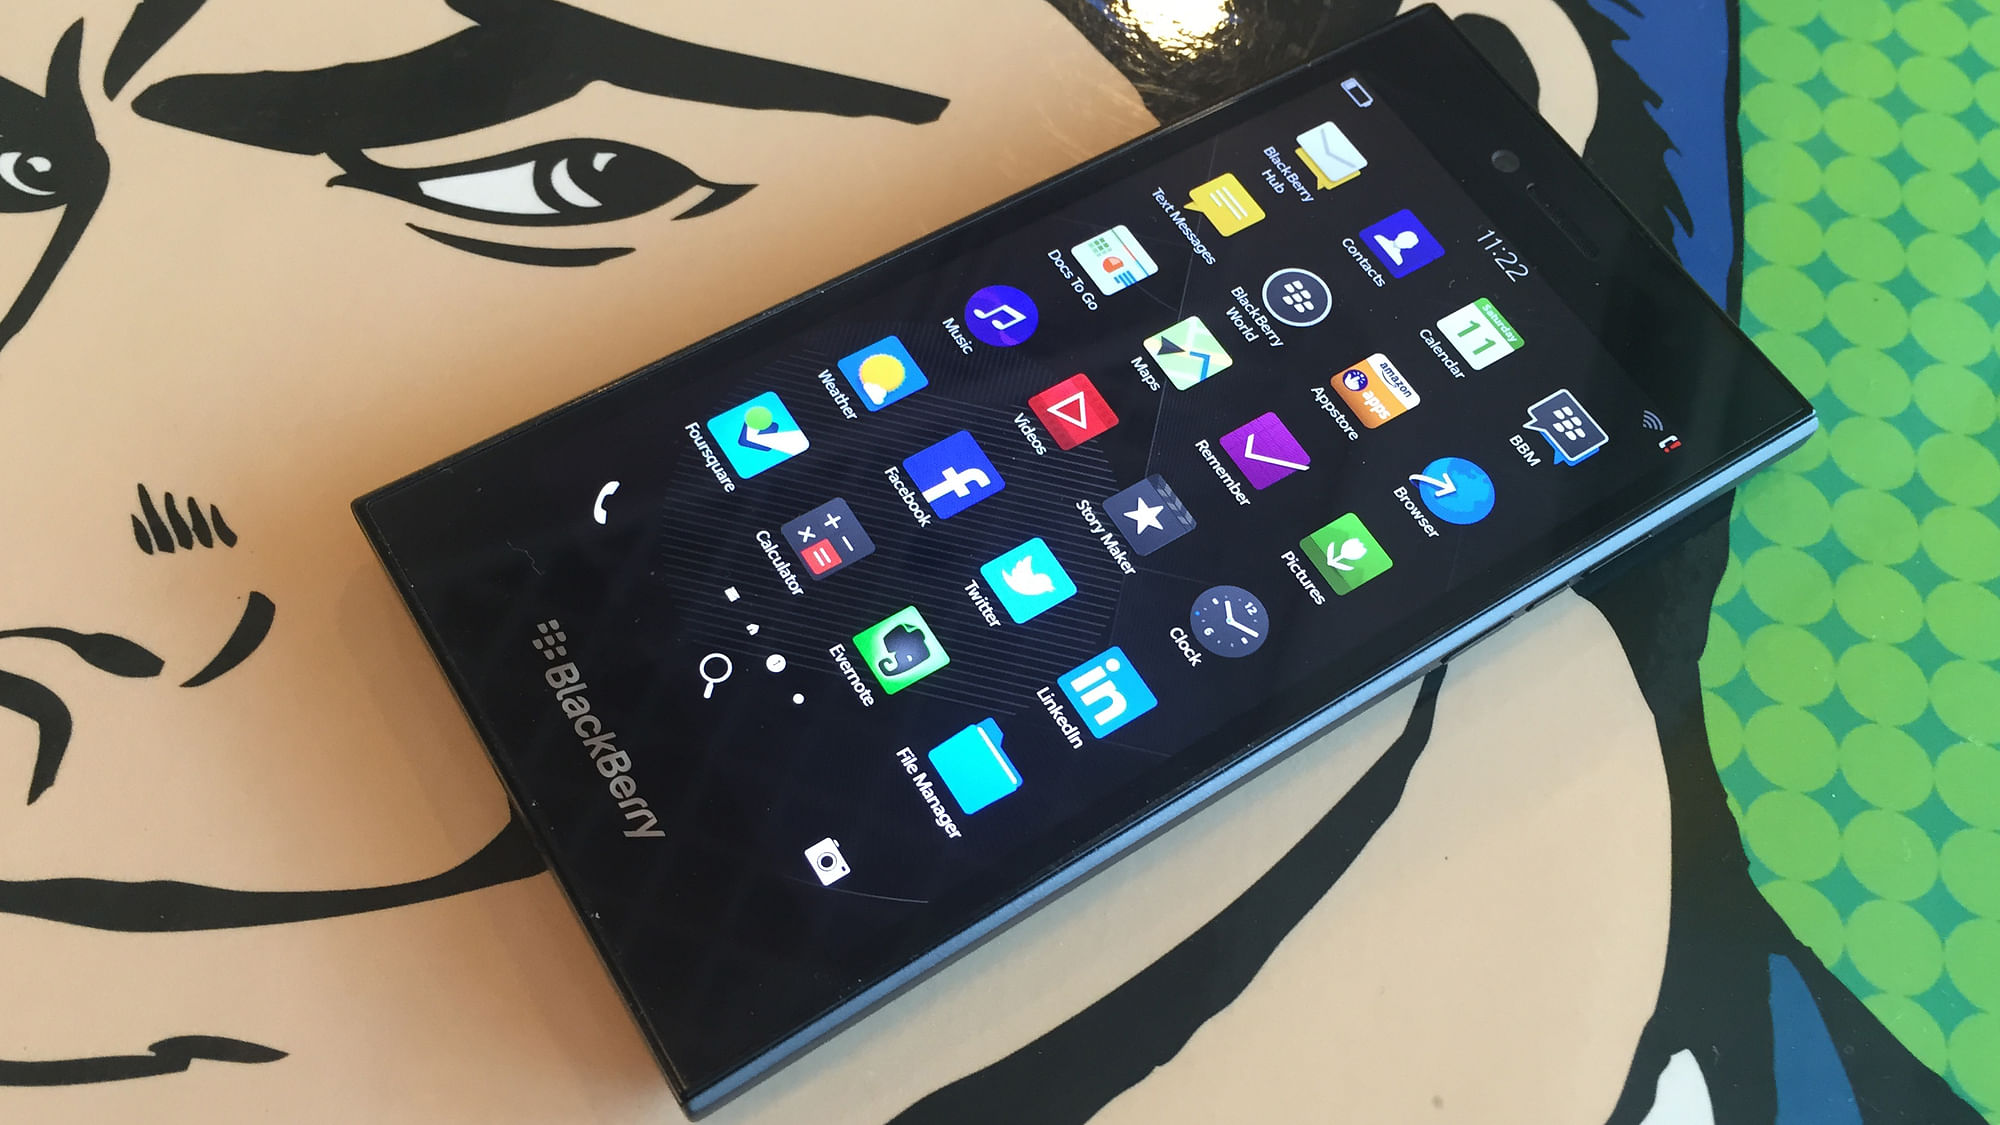 BlackBerry Leap (Photo: TheQuint)